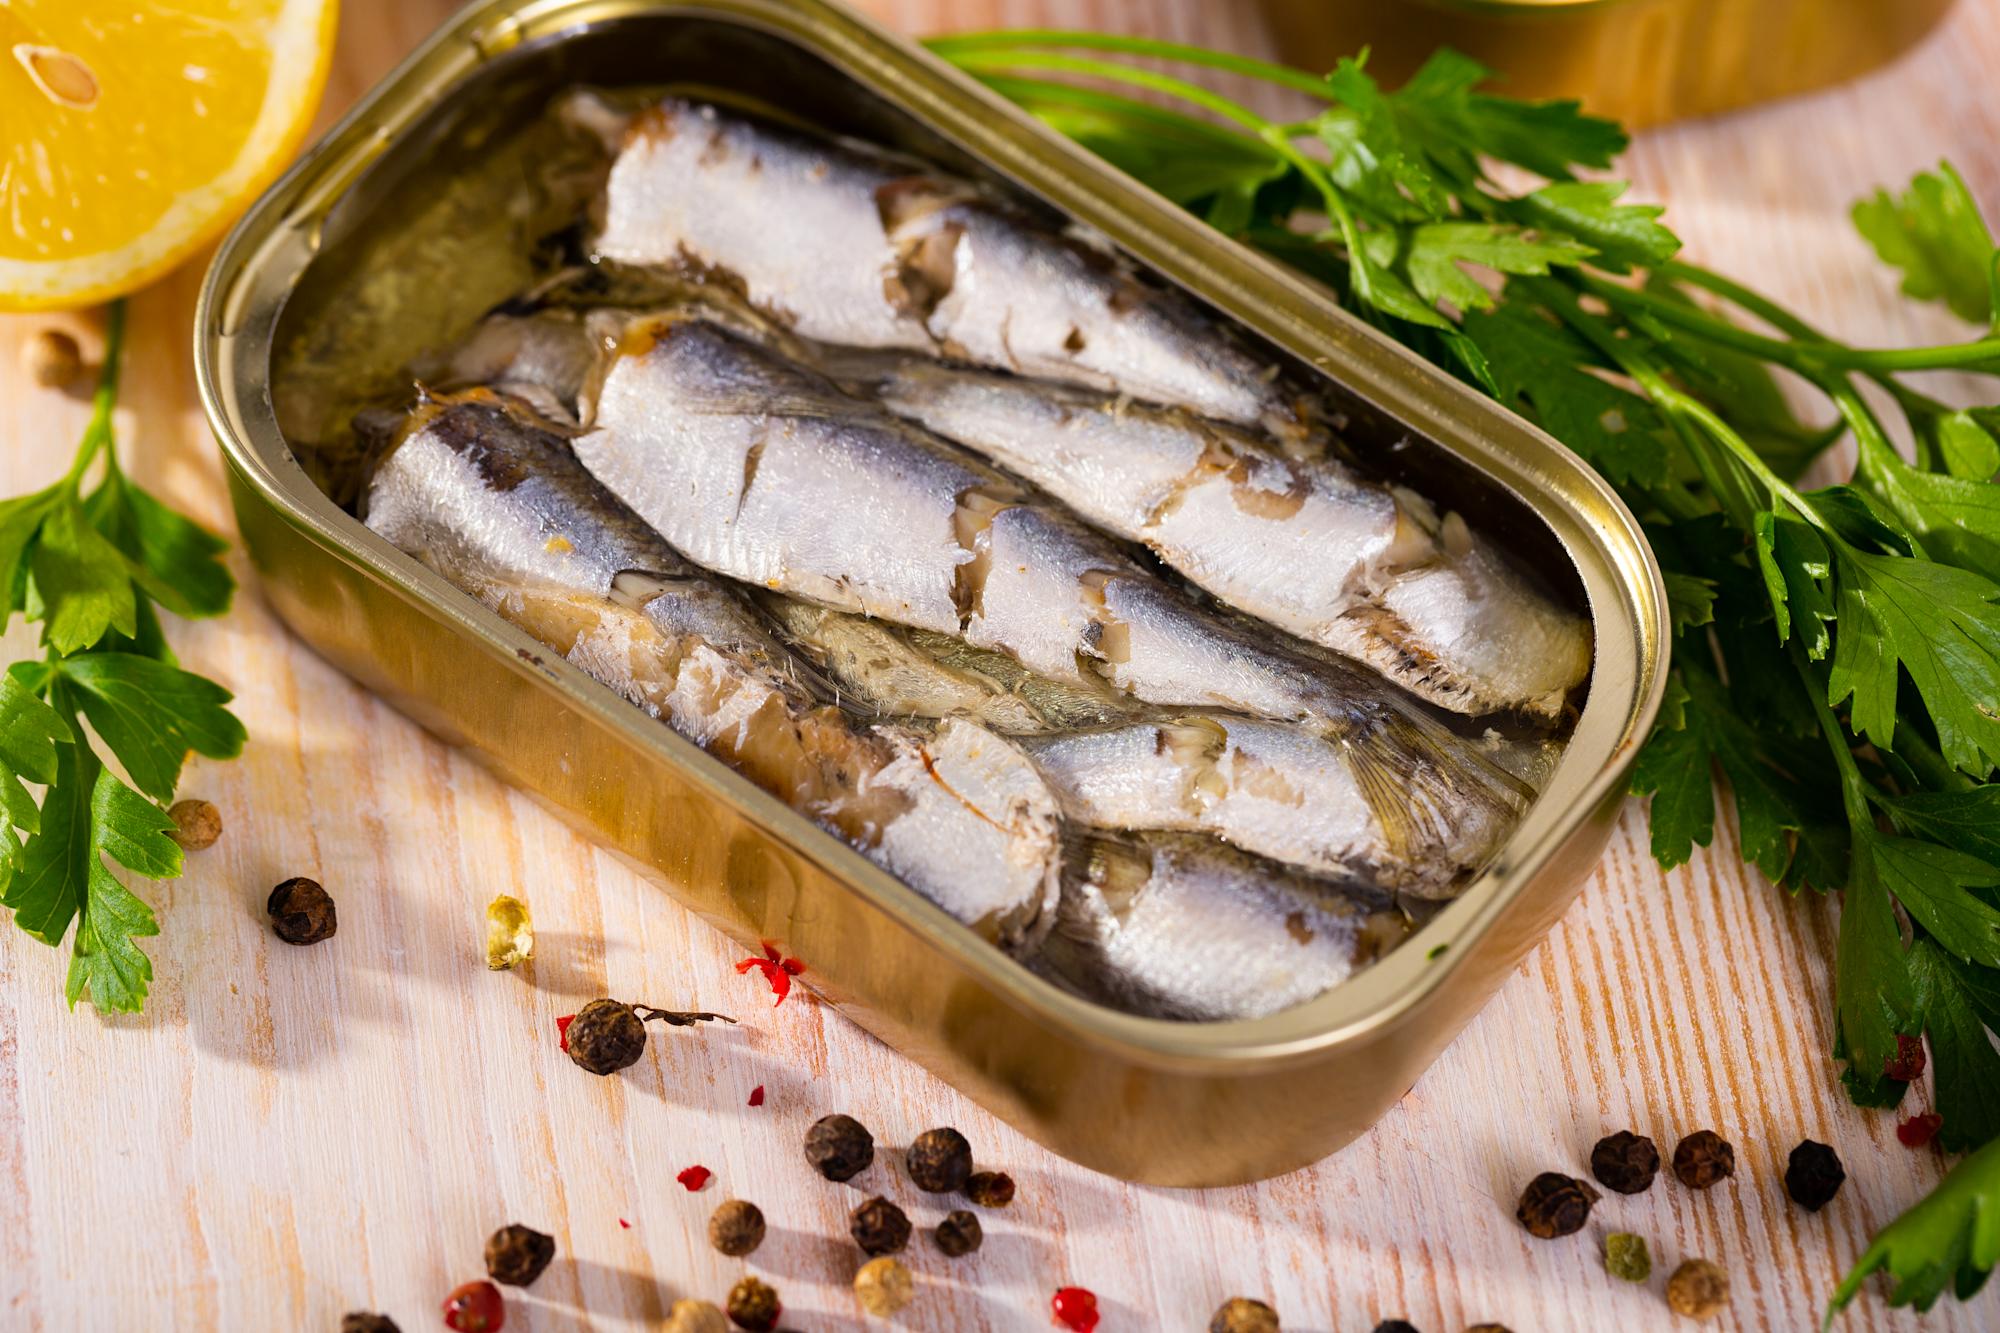 Type 2 diabetes could be prevented by eating sardines